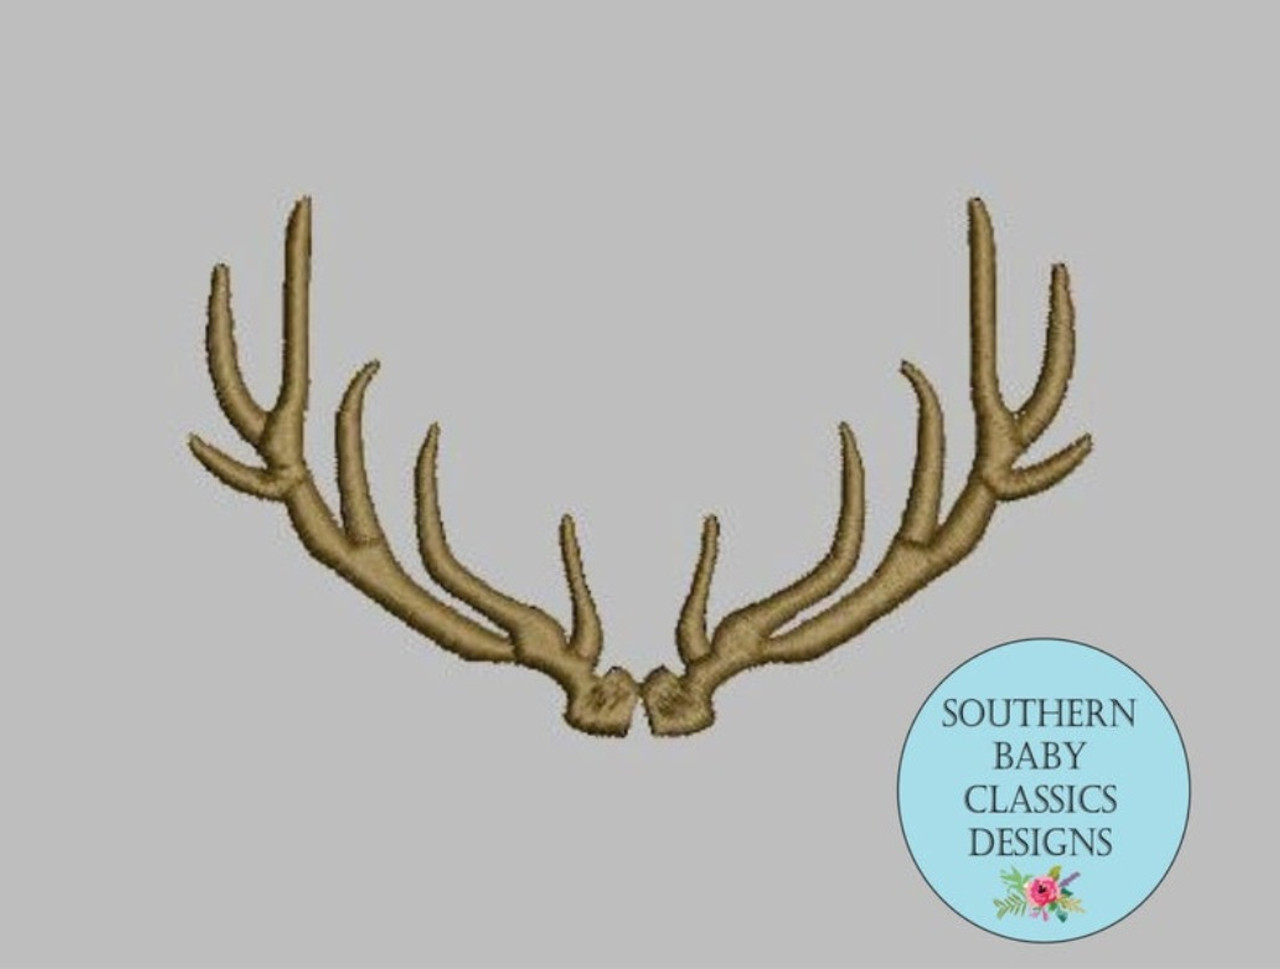 Deer Head Silhouette with Antlers - Comes in Fill Stitch and Applique